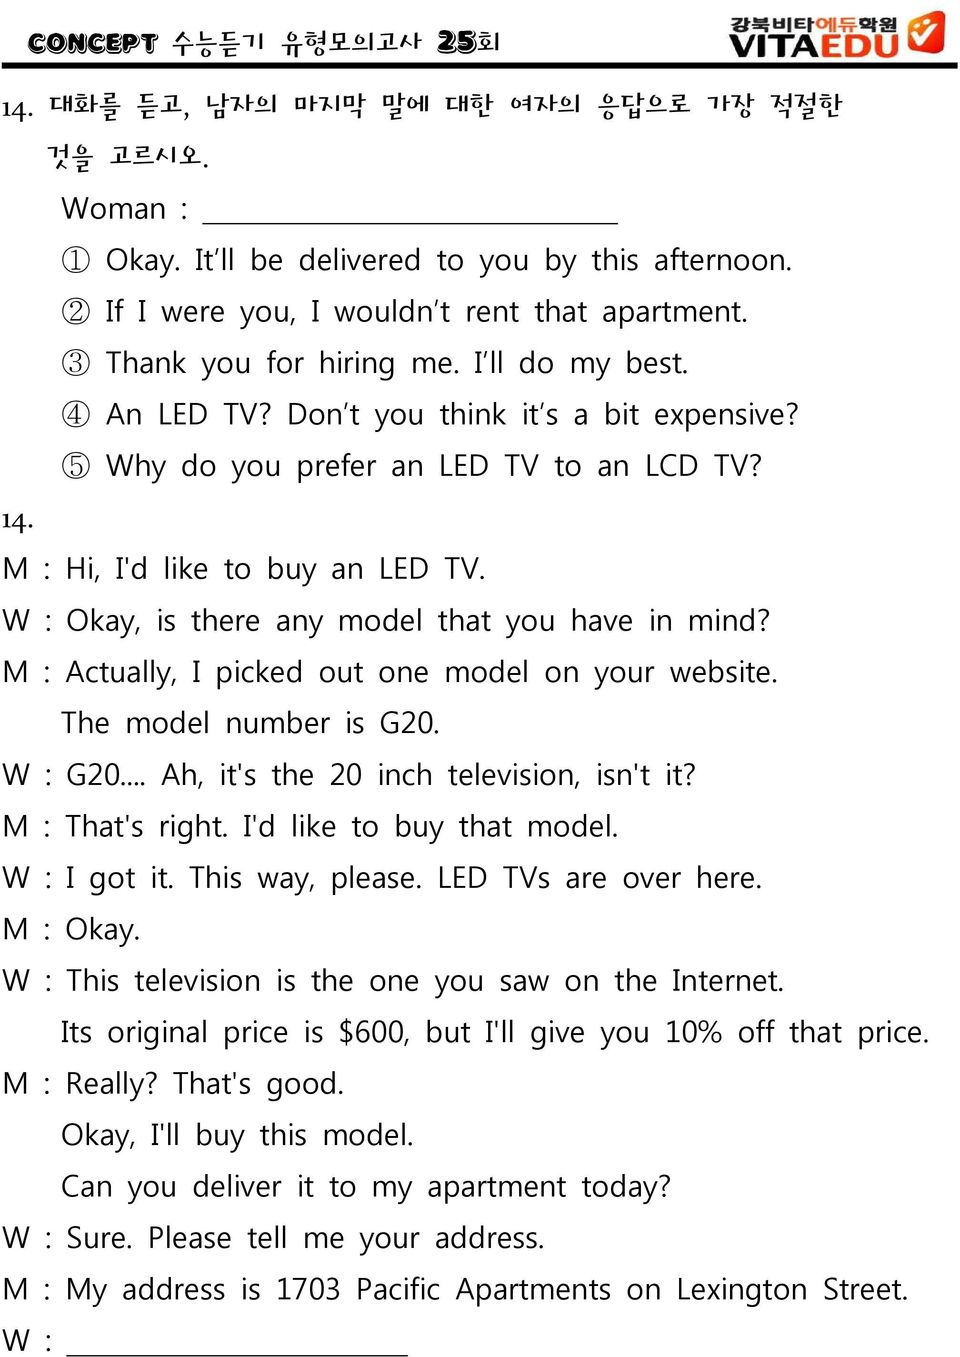 W : Okay, is there any model that you have in mind? M : Actually, I picked out one model on your website. The model number is G20. W : G20... Ah, it's the 20 inch television, isn't it?